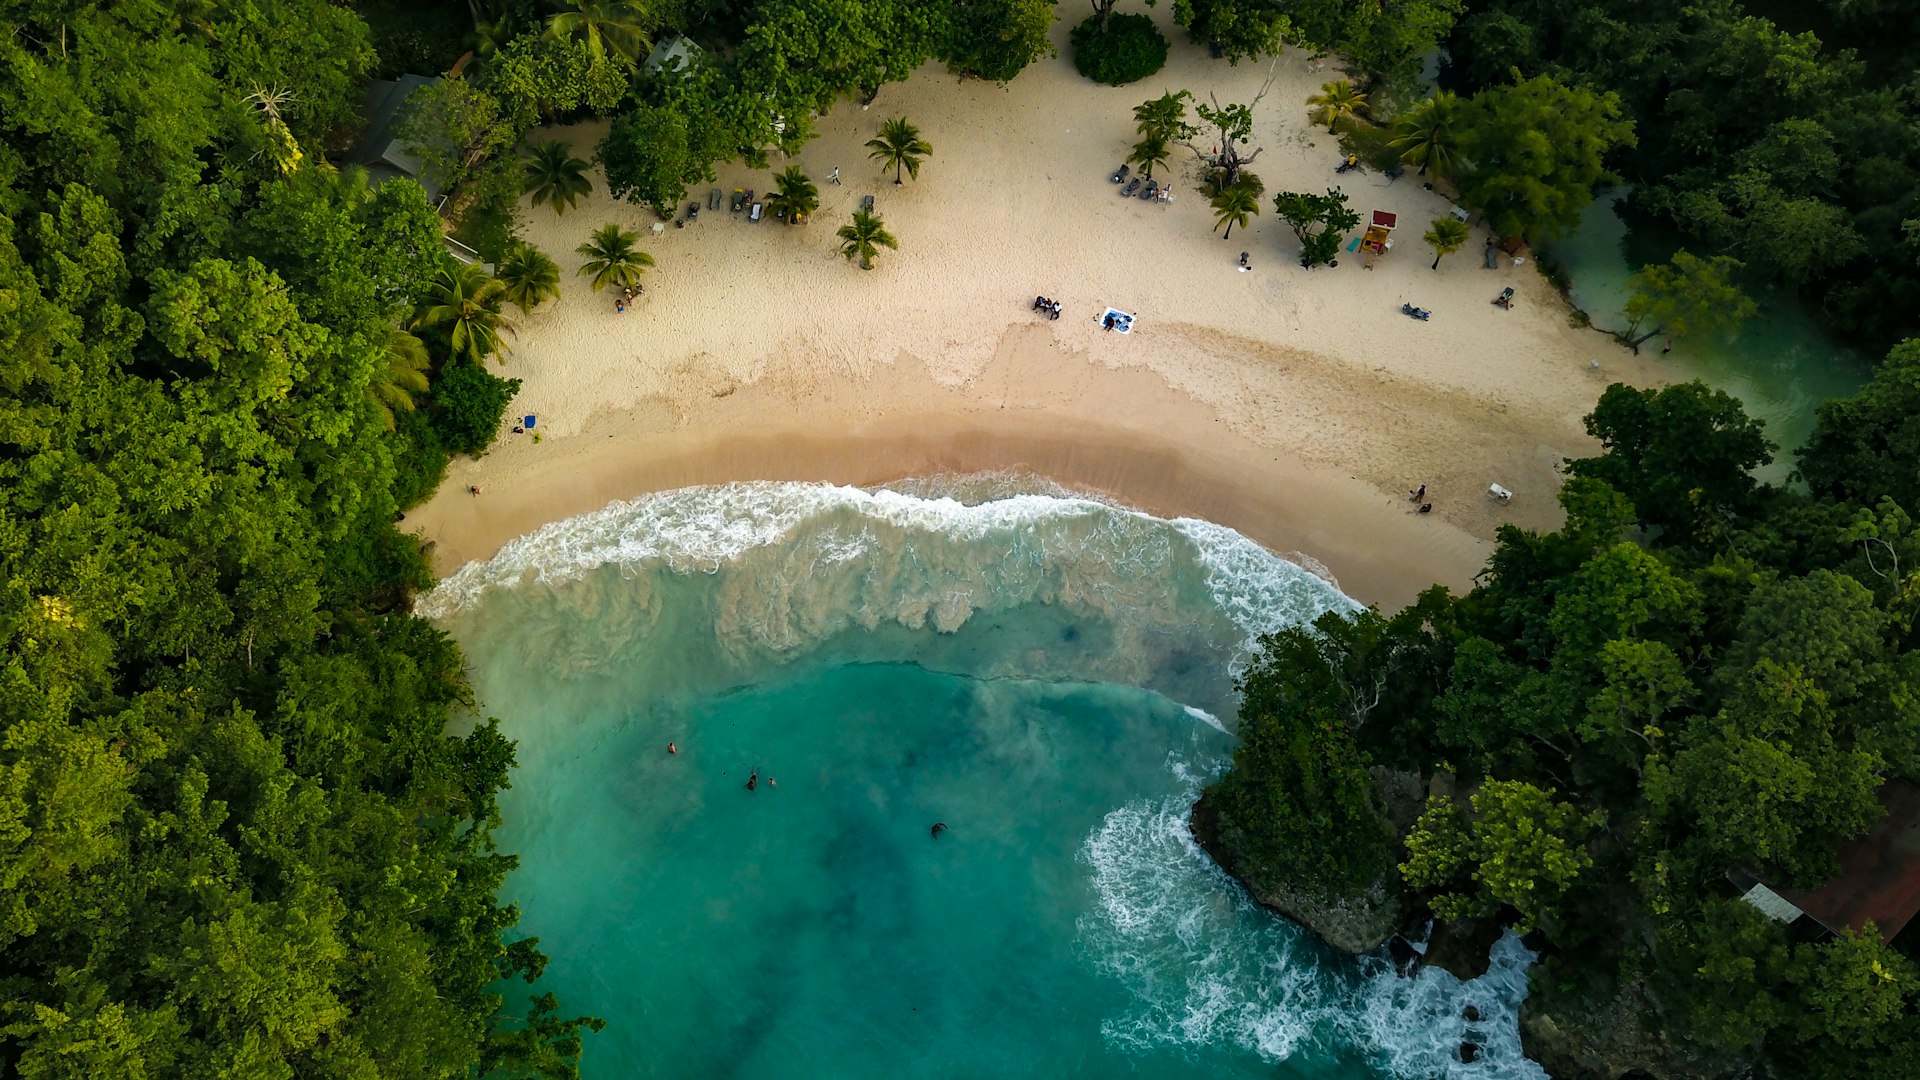 An aerial view of a beach surrounded by trees